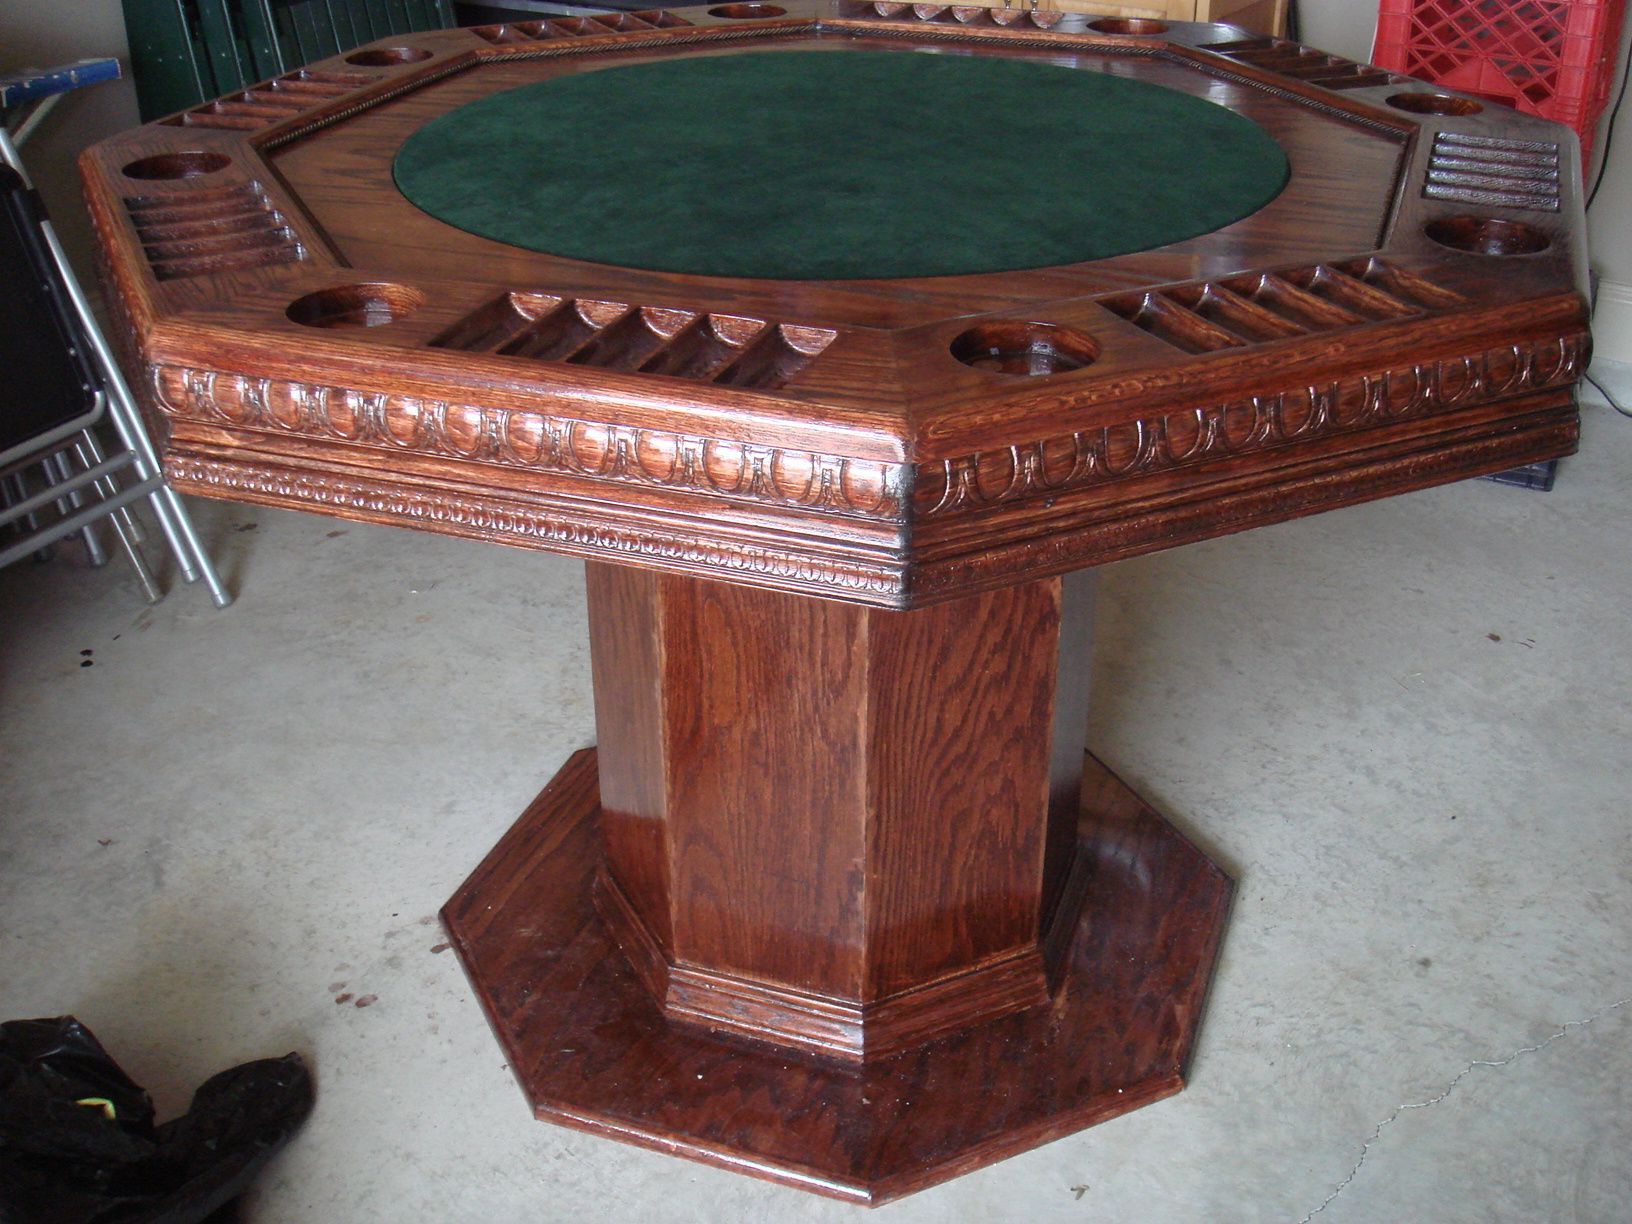 Mcbride 48" 4 – Player Poker Tables Inside Newest Poker Table (View 7 of 20)